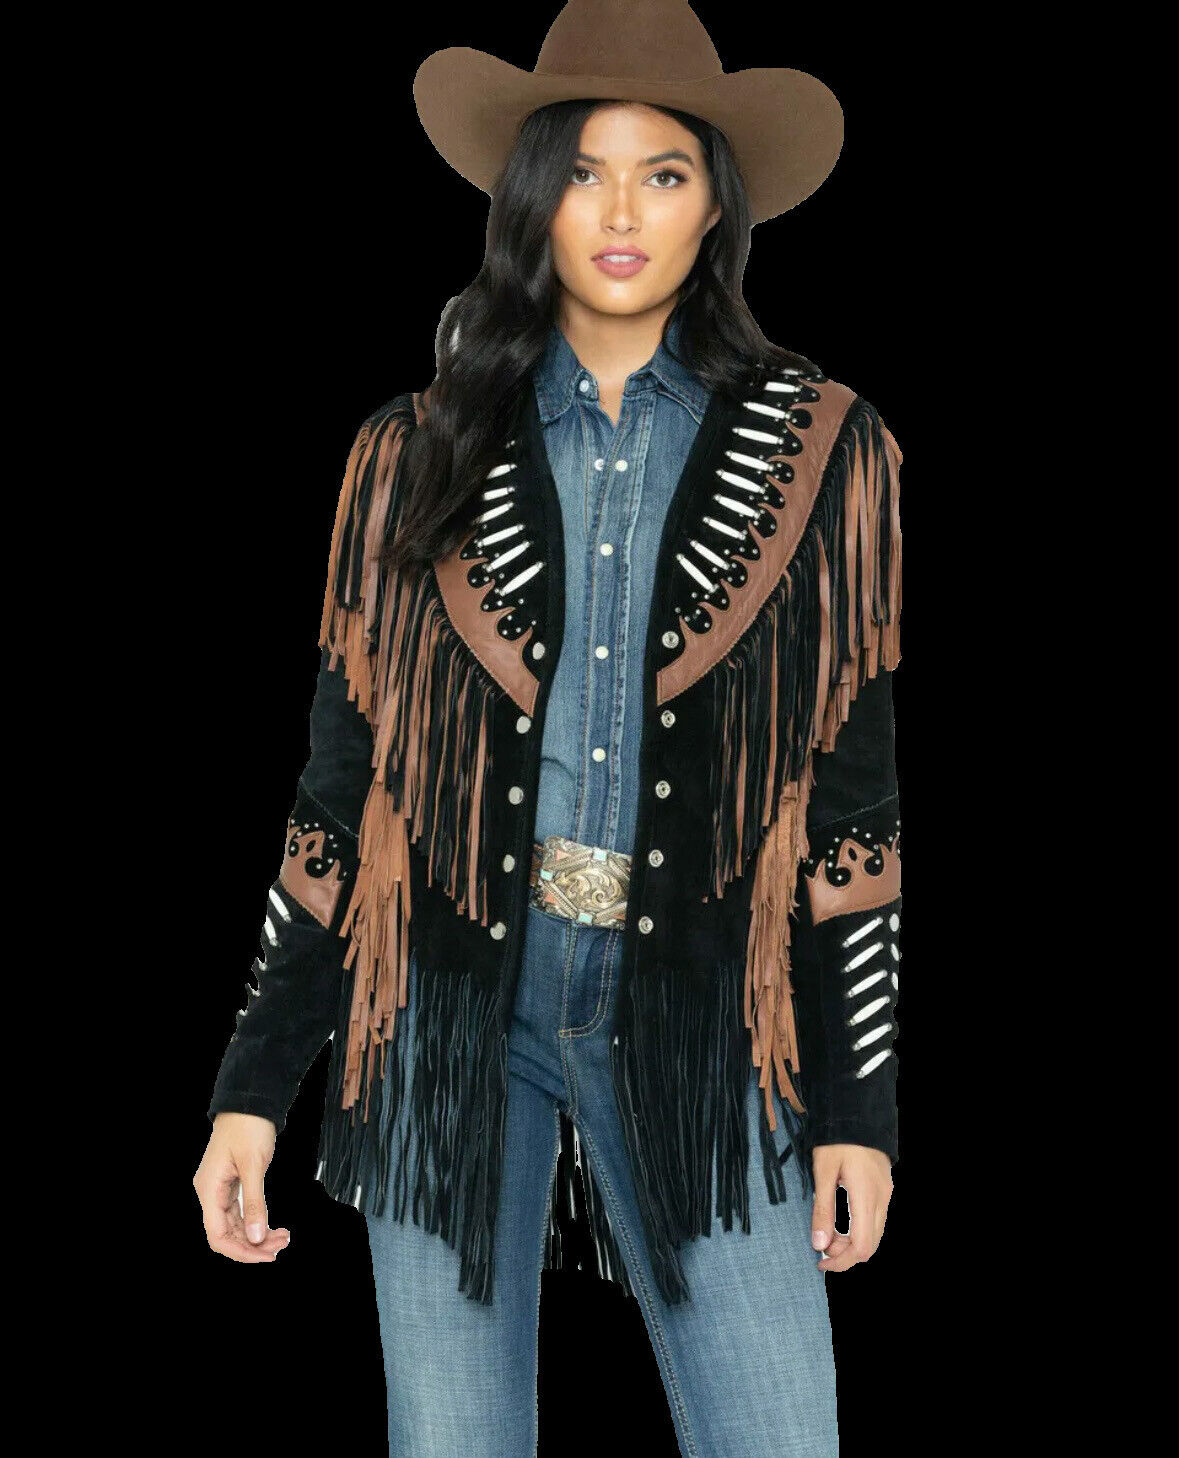 Women’s Native Western Cowgirl Style Suede Leather Jacket coat with Fringes